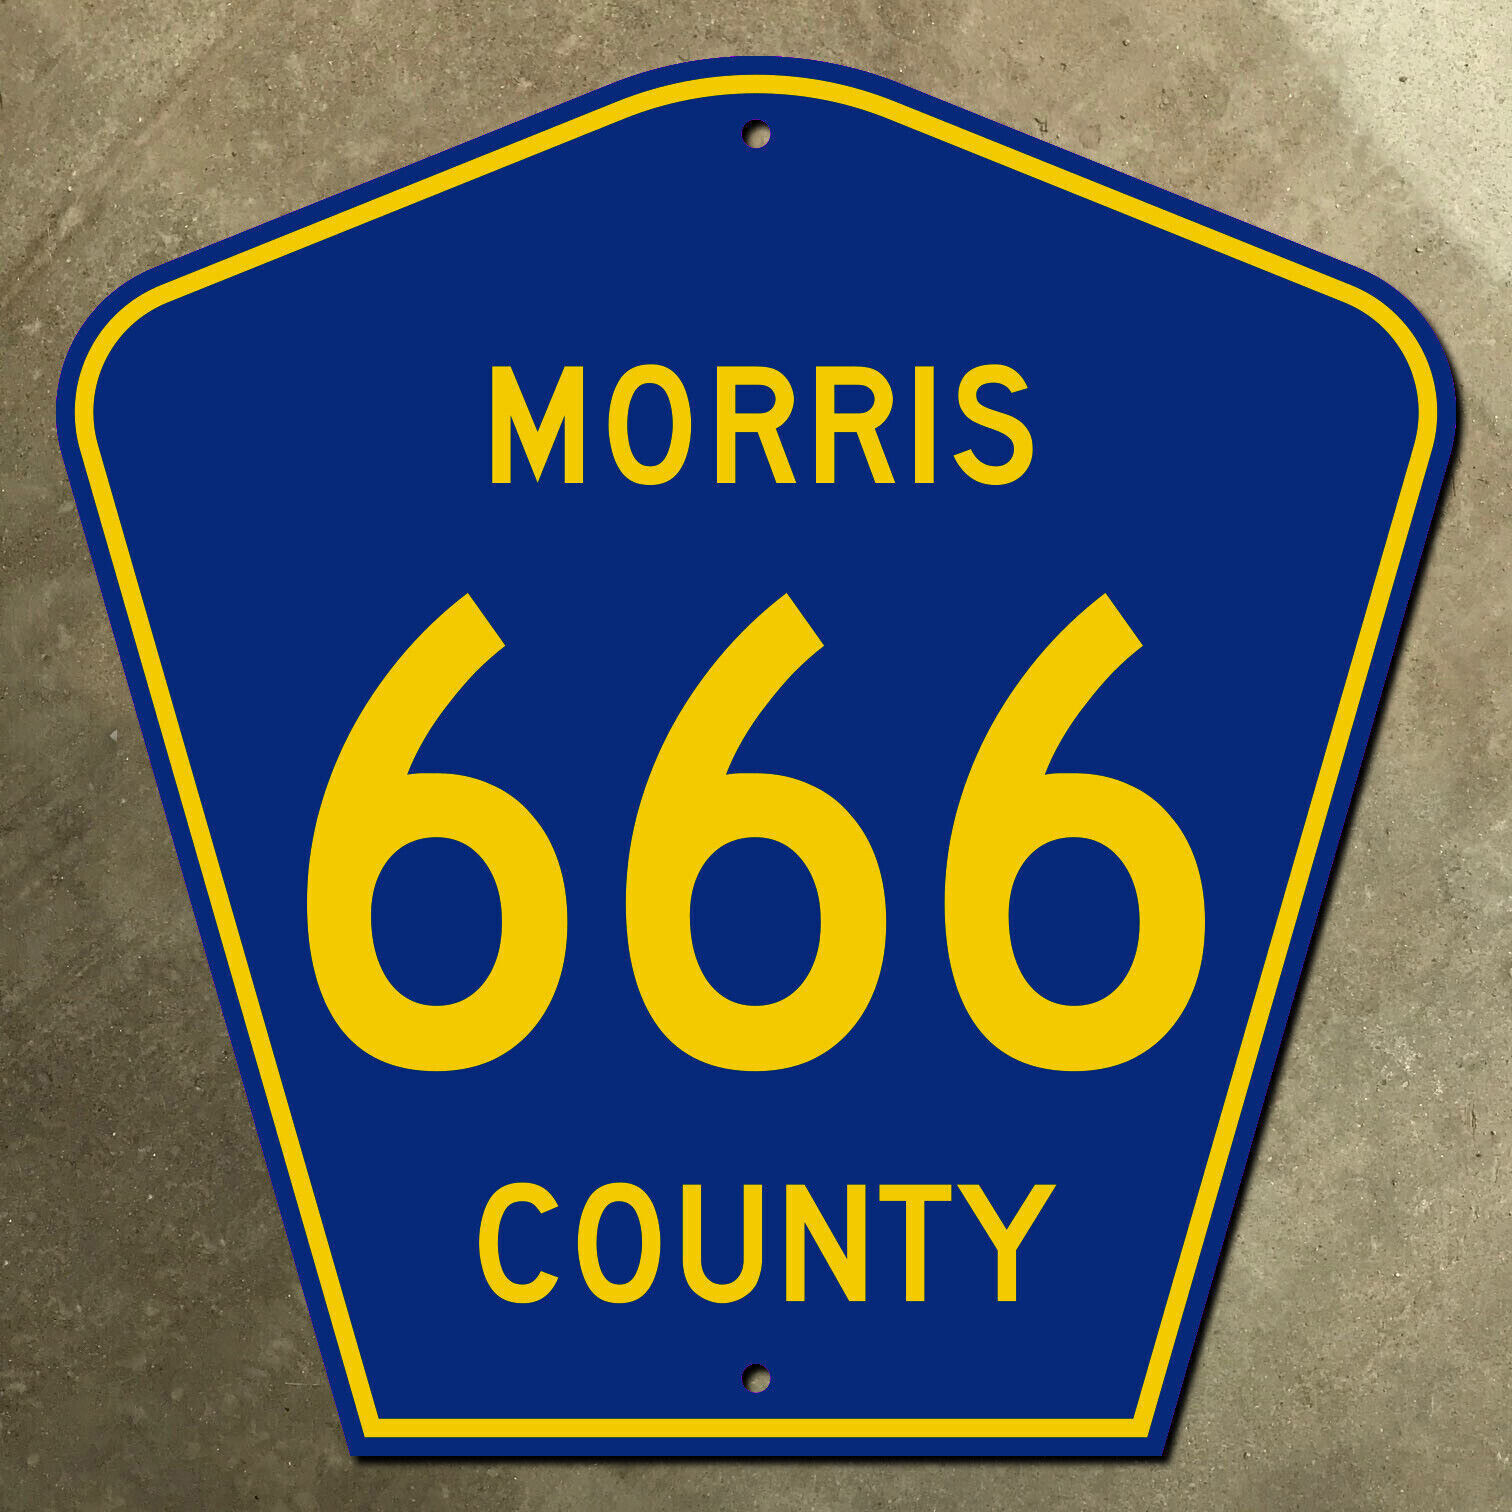 New Jersey Morris County NYC metro route 666 highway marker 1959 road sign 18x18